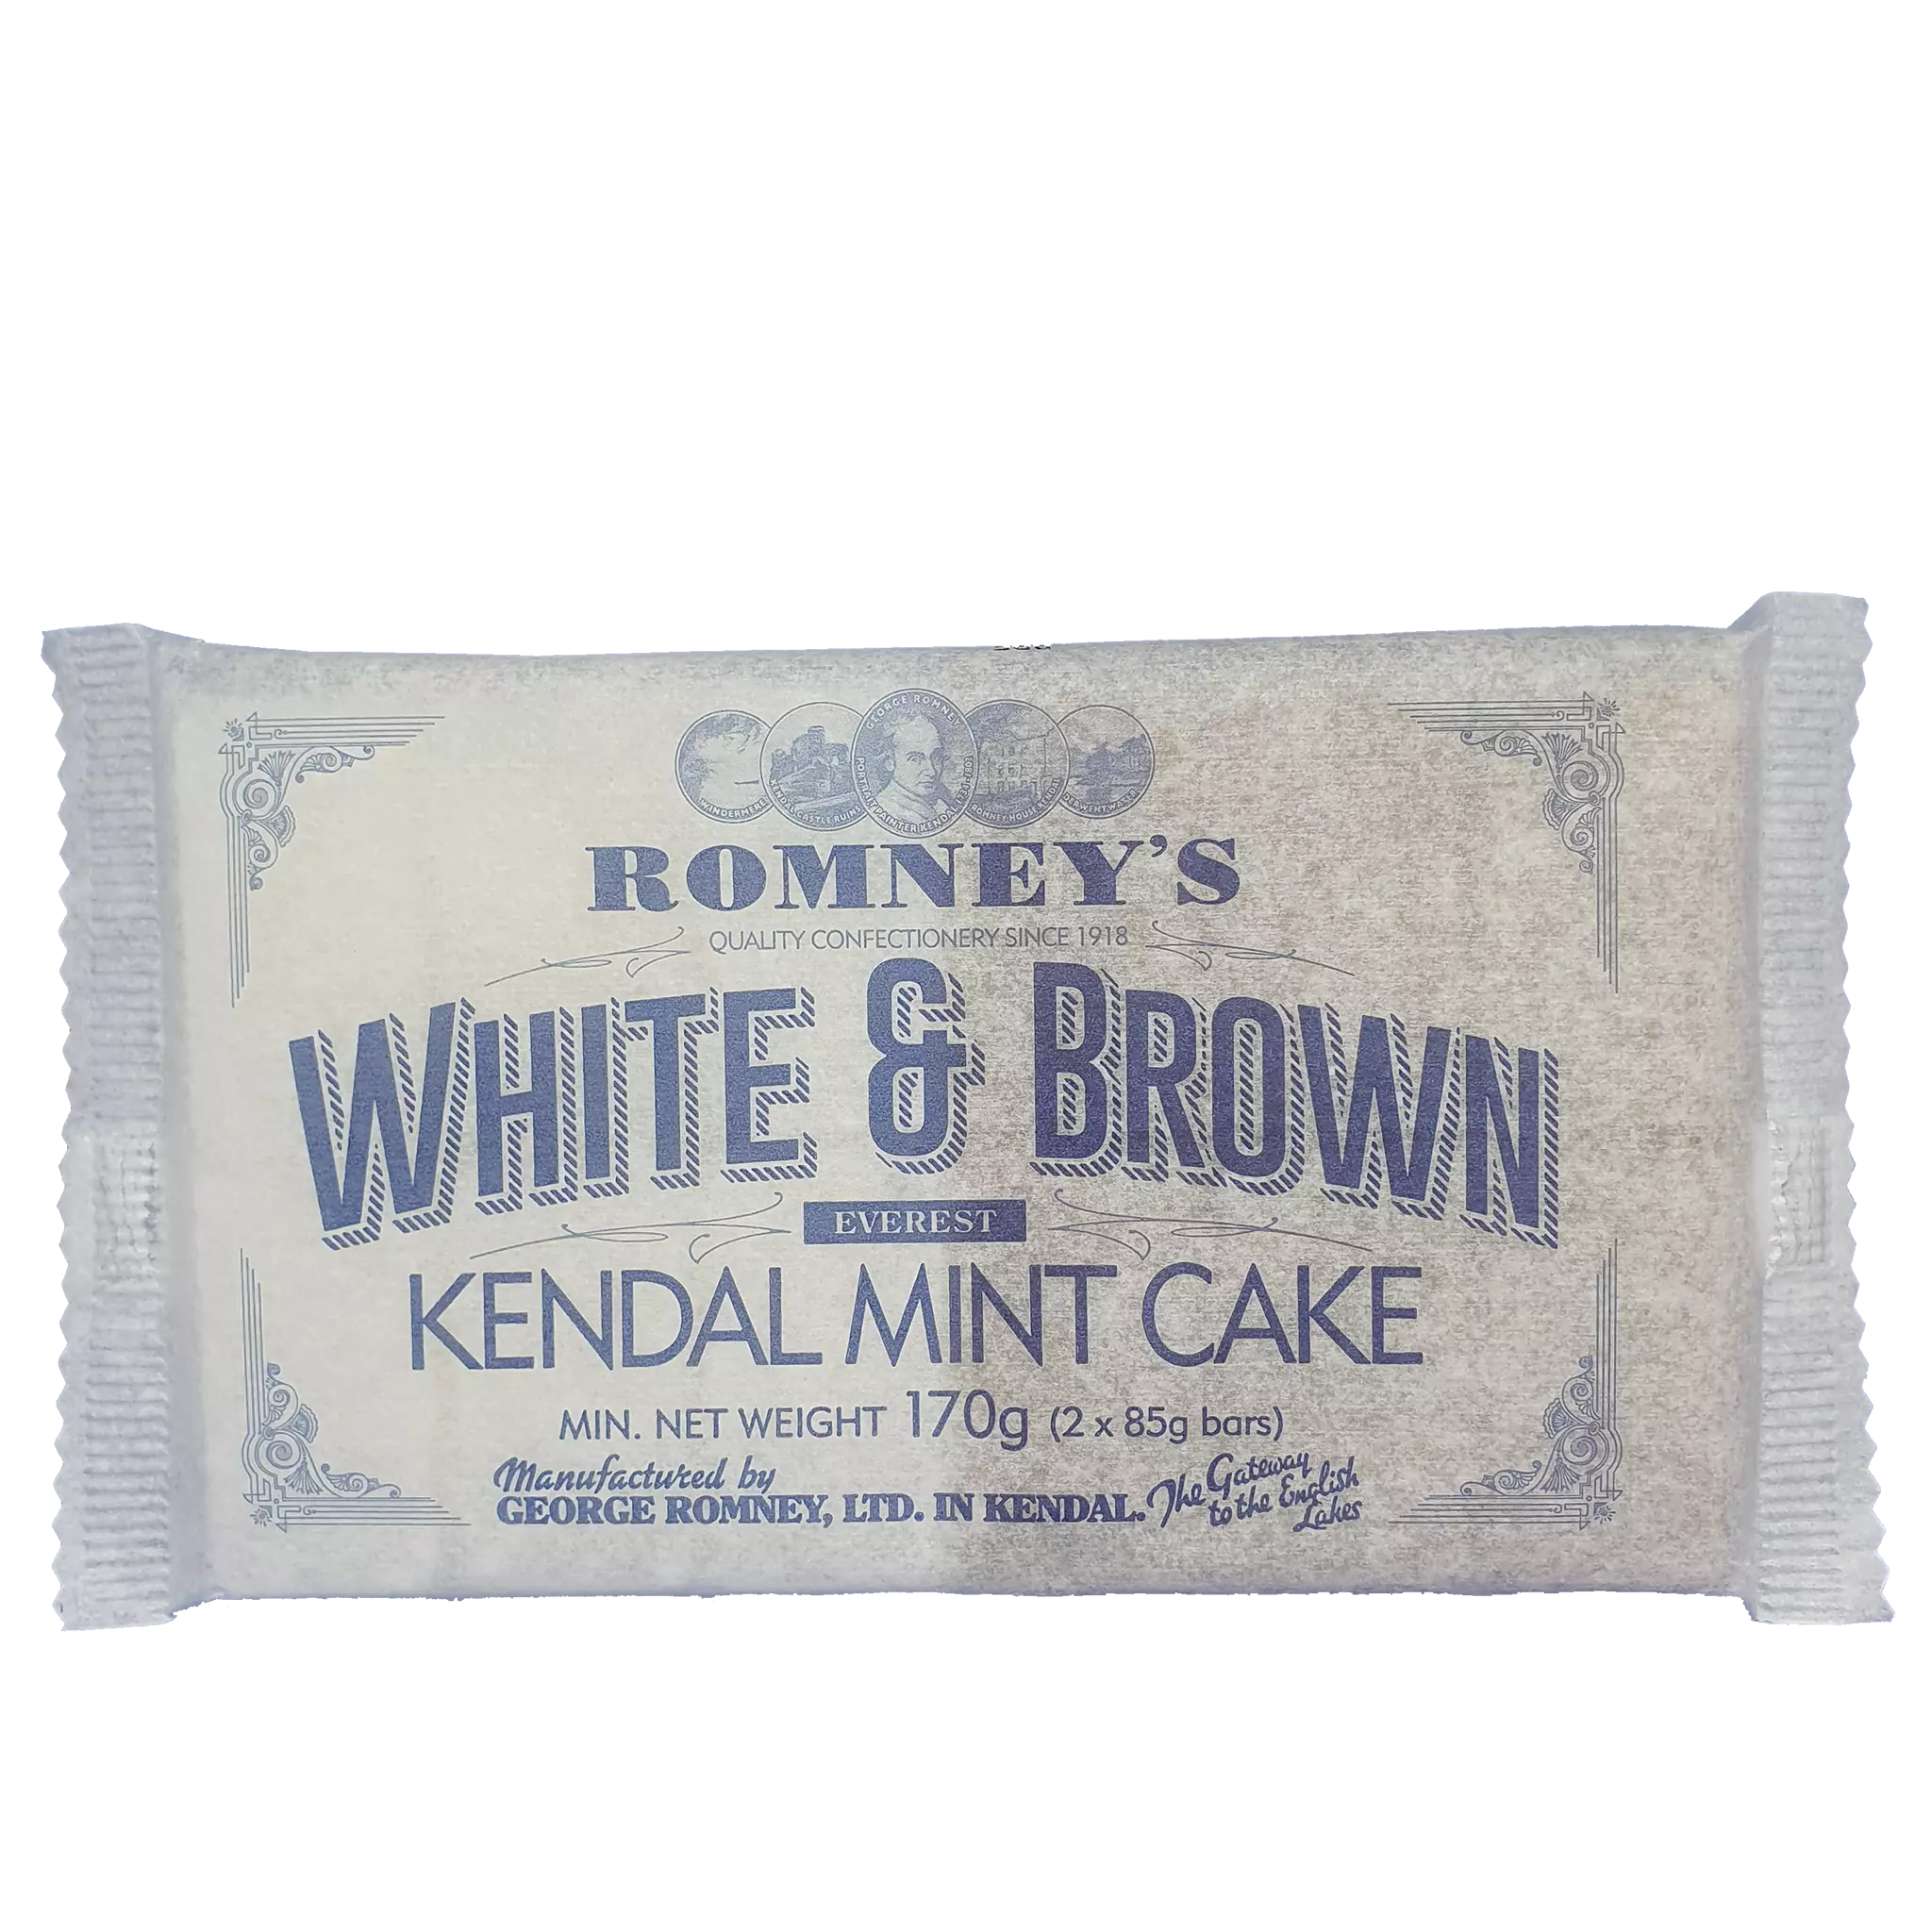 A paper wrapper containing a bar of White Kendal Mint Cake and a bar of Brown Kendal Mint Cake. The wrapper features the Romney's logo with the writing 'White & Brown Kendal Mint Cake' in a blue font.